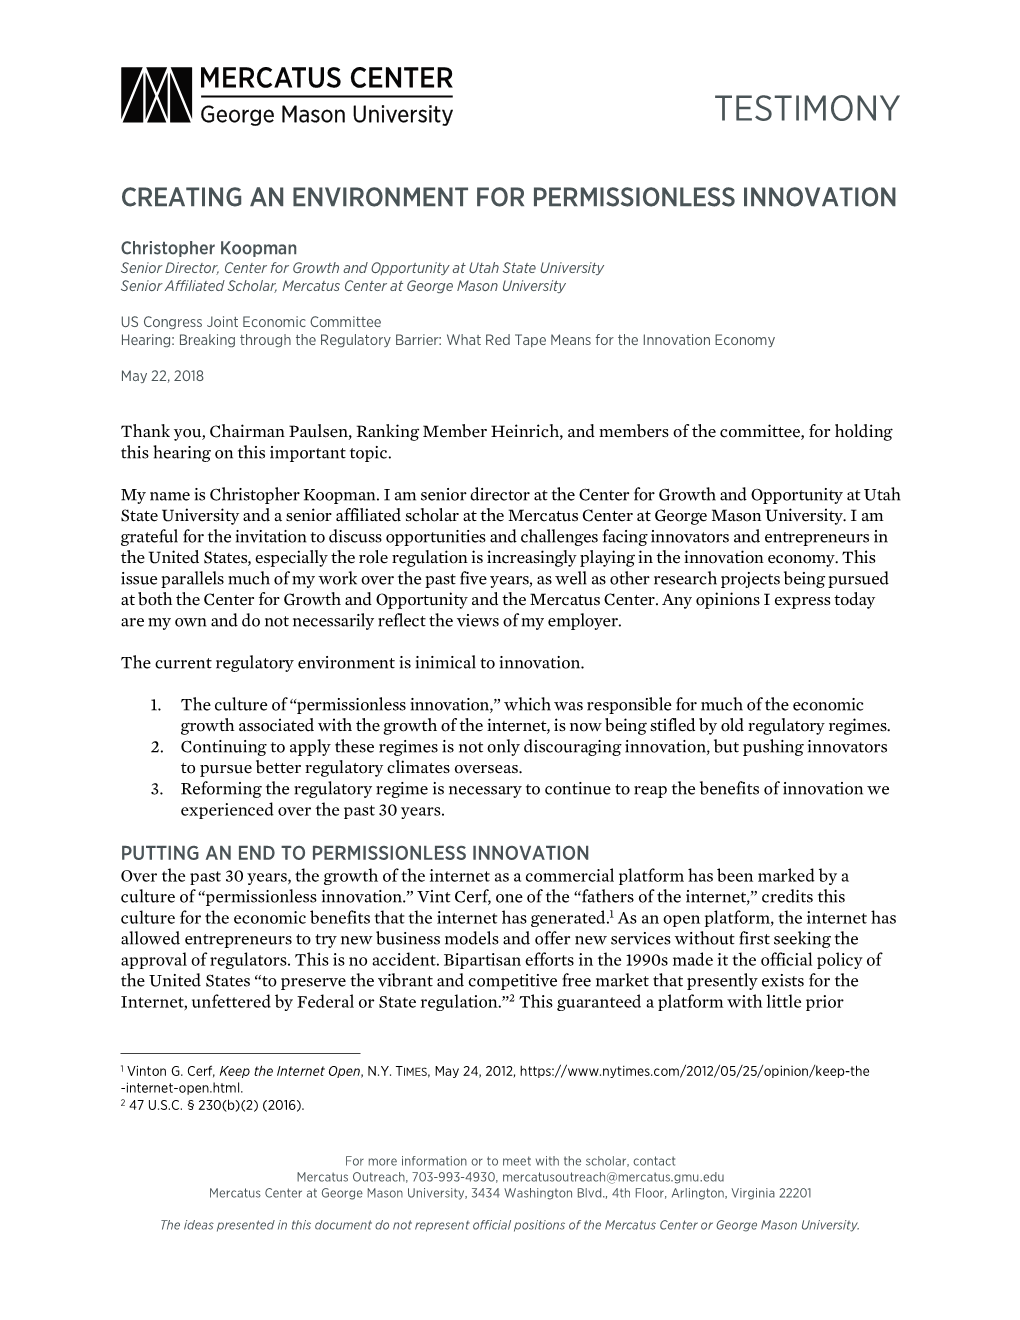 Creating an Environment for Permissionless Innovation